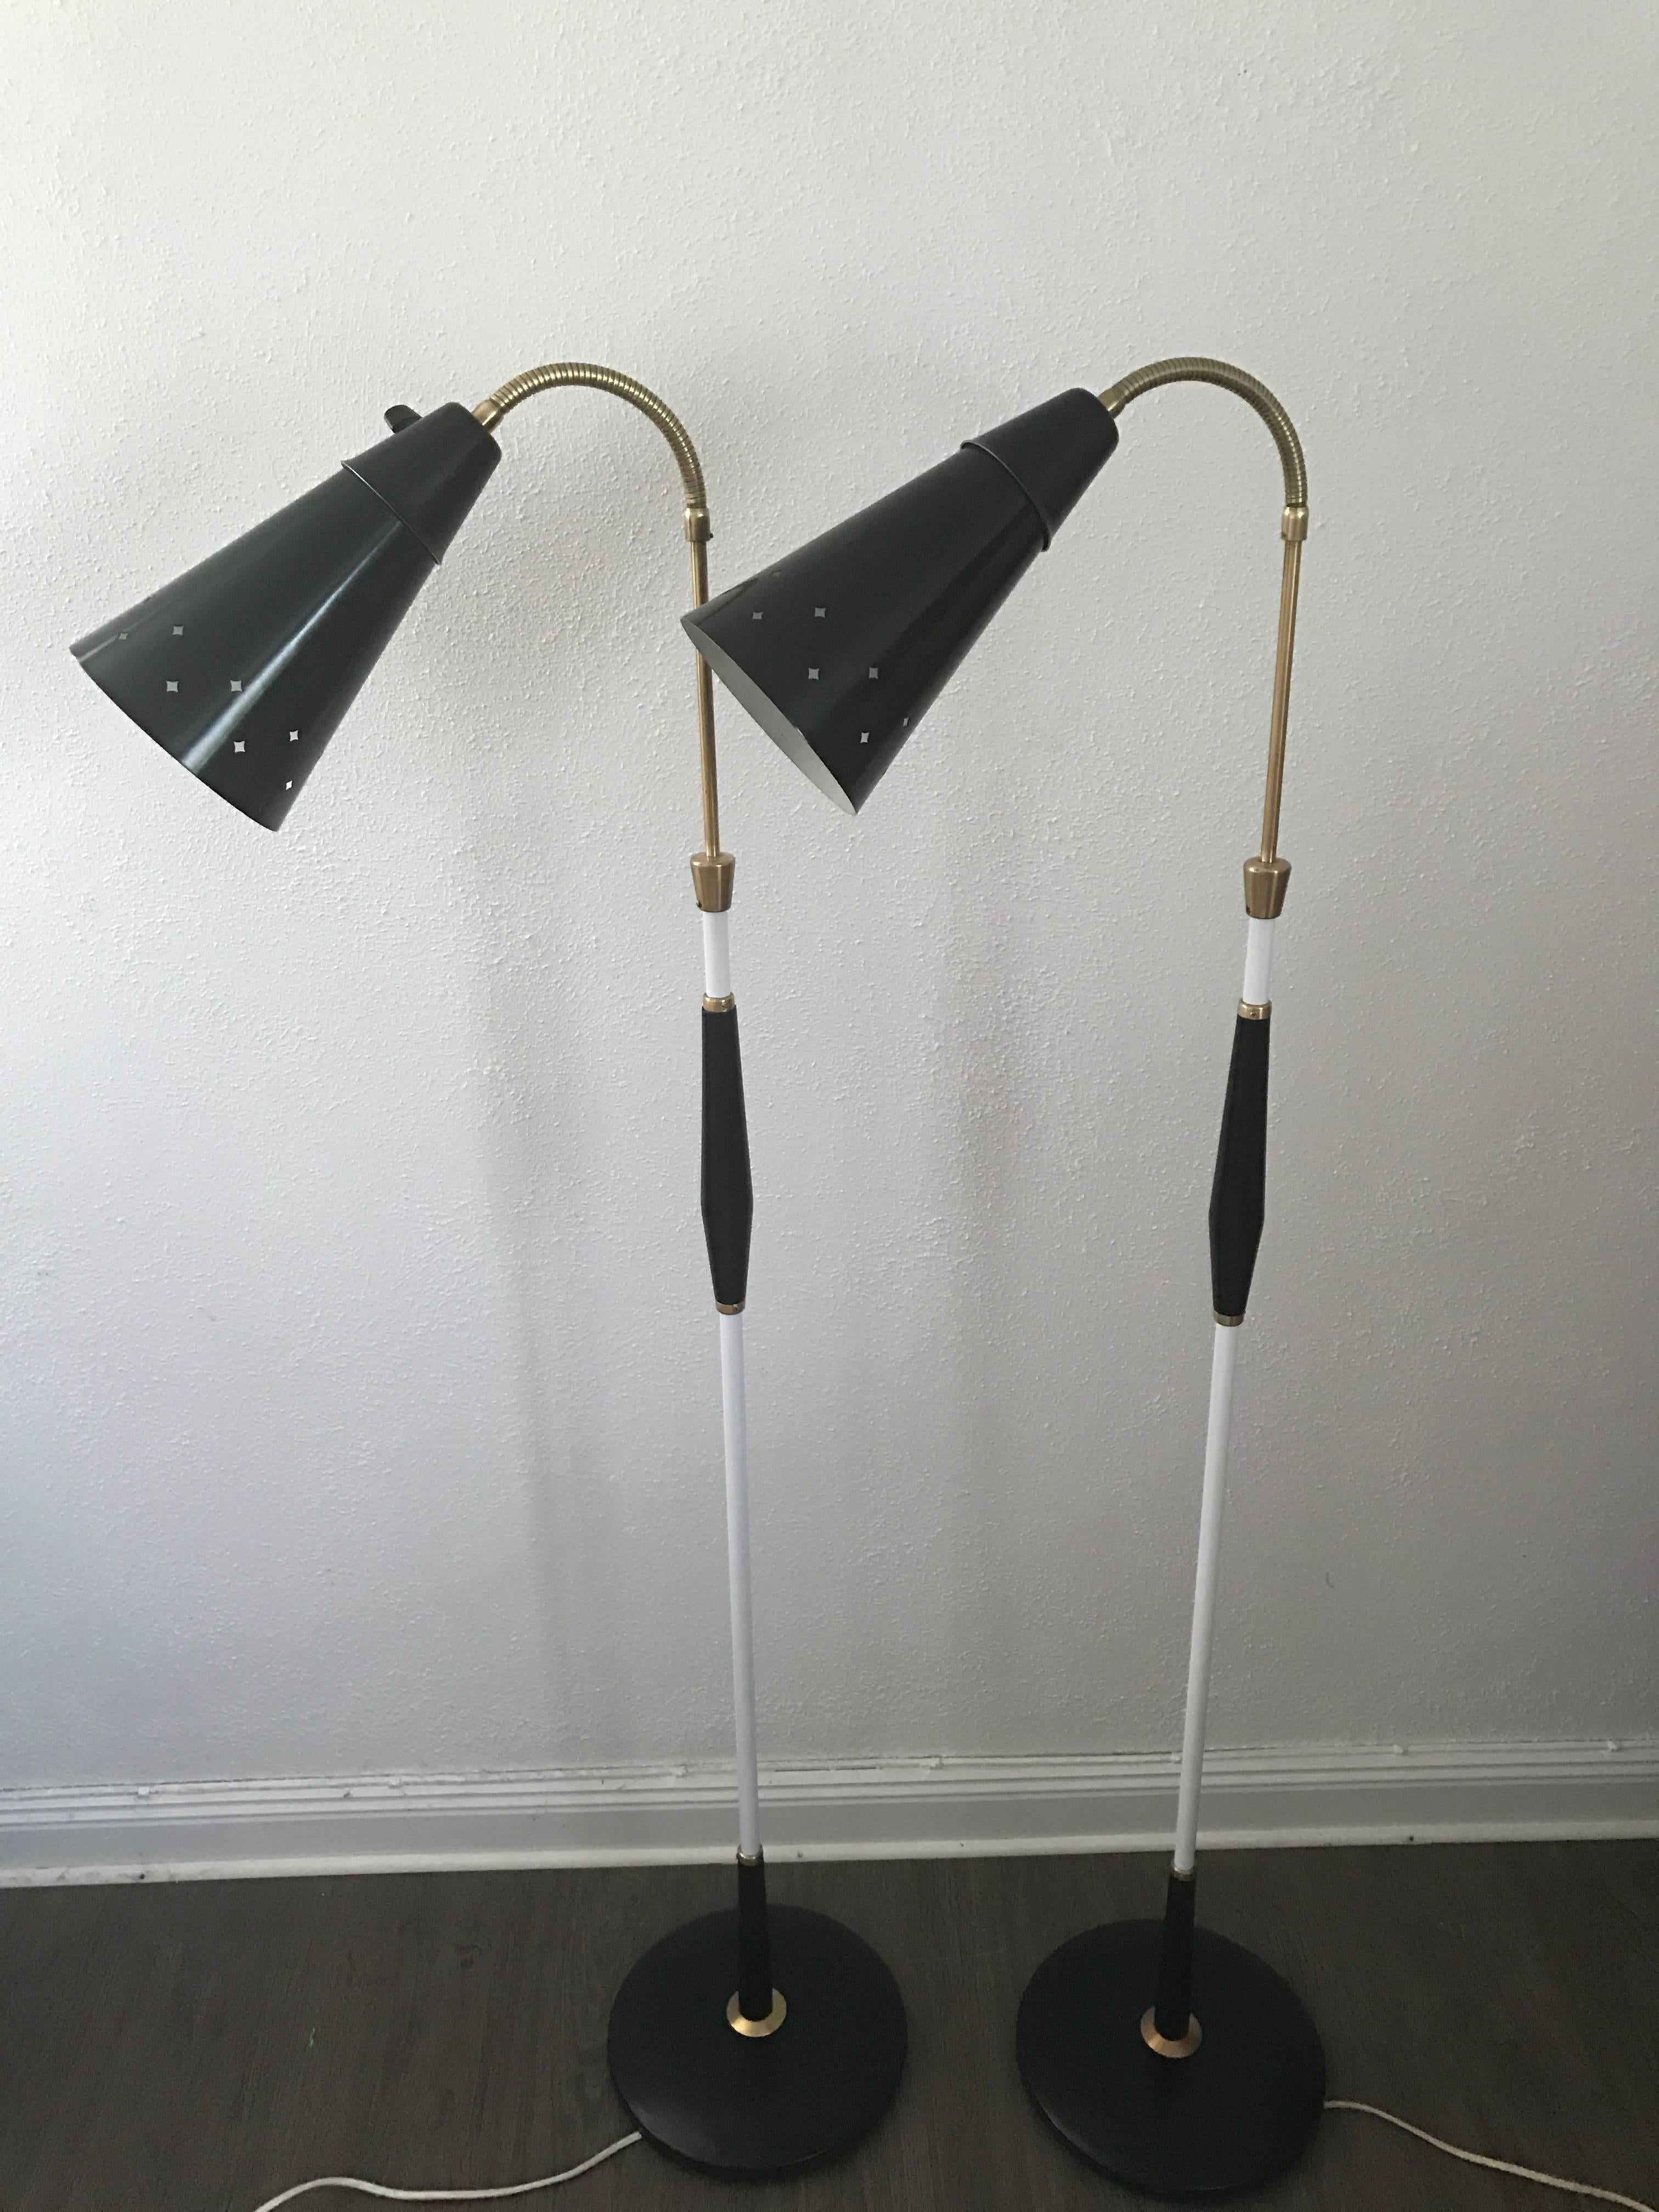 Pair of 1950 Swedish Pagos floor lamps with flexible shades.
A nice pair of flexible floor lamps made of wood and metal. This pair has been restored and painted, they come with new wiring and cords, but the old switches are original and in a nice